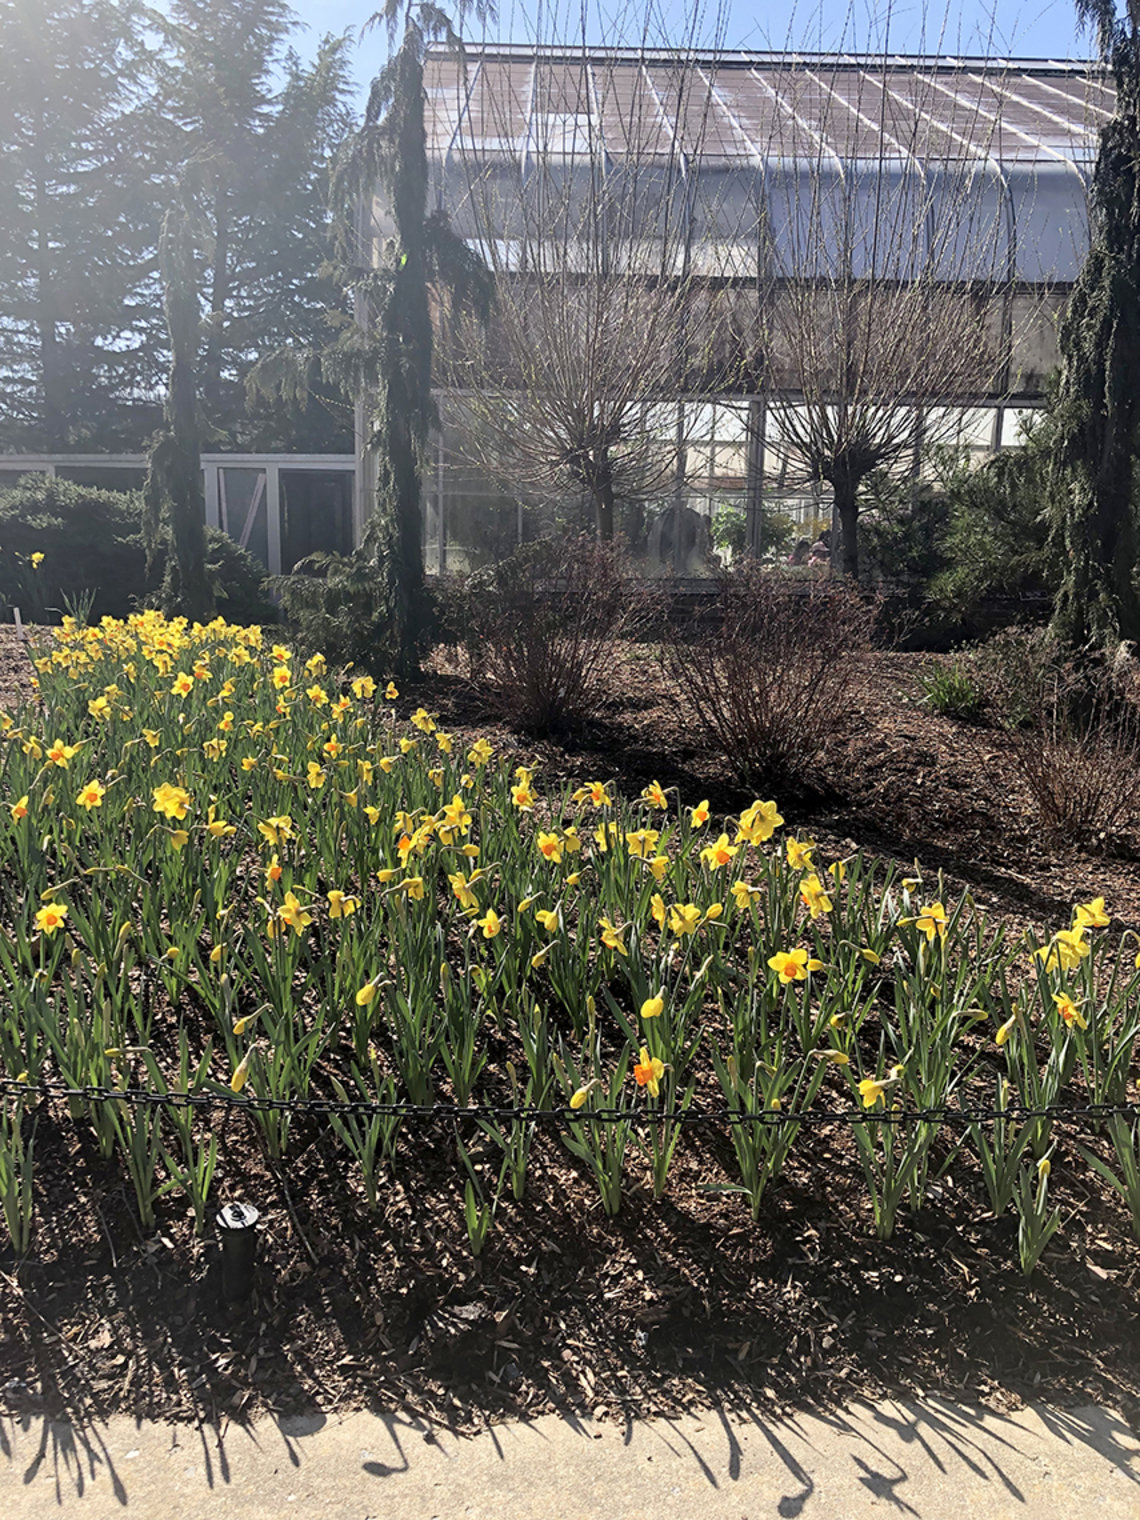 A large group of daffodils bloom in front of a greenhouse, Brookside Gardens, Wheaton, Maryland